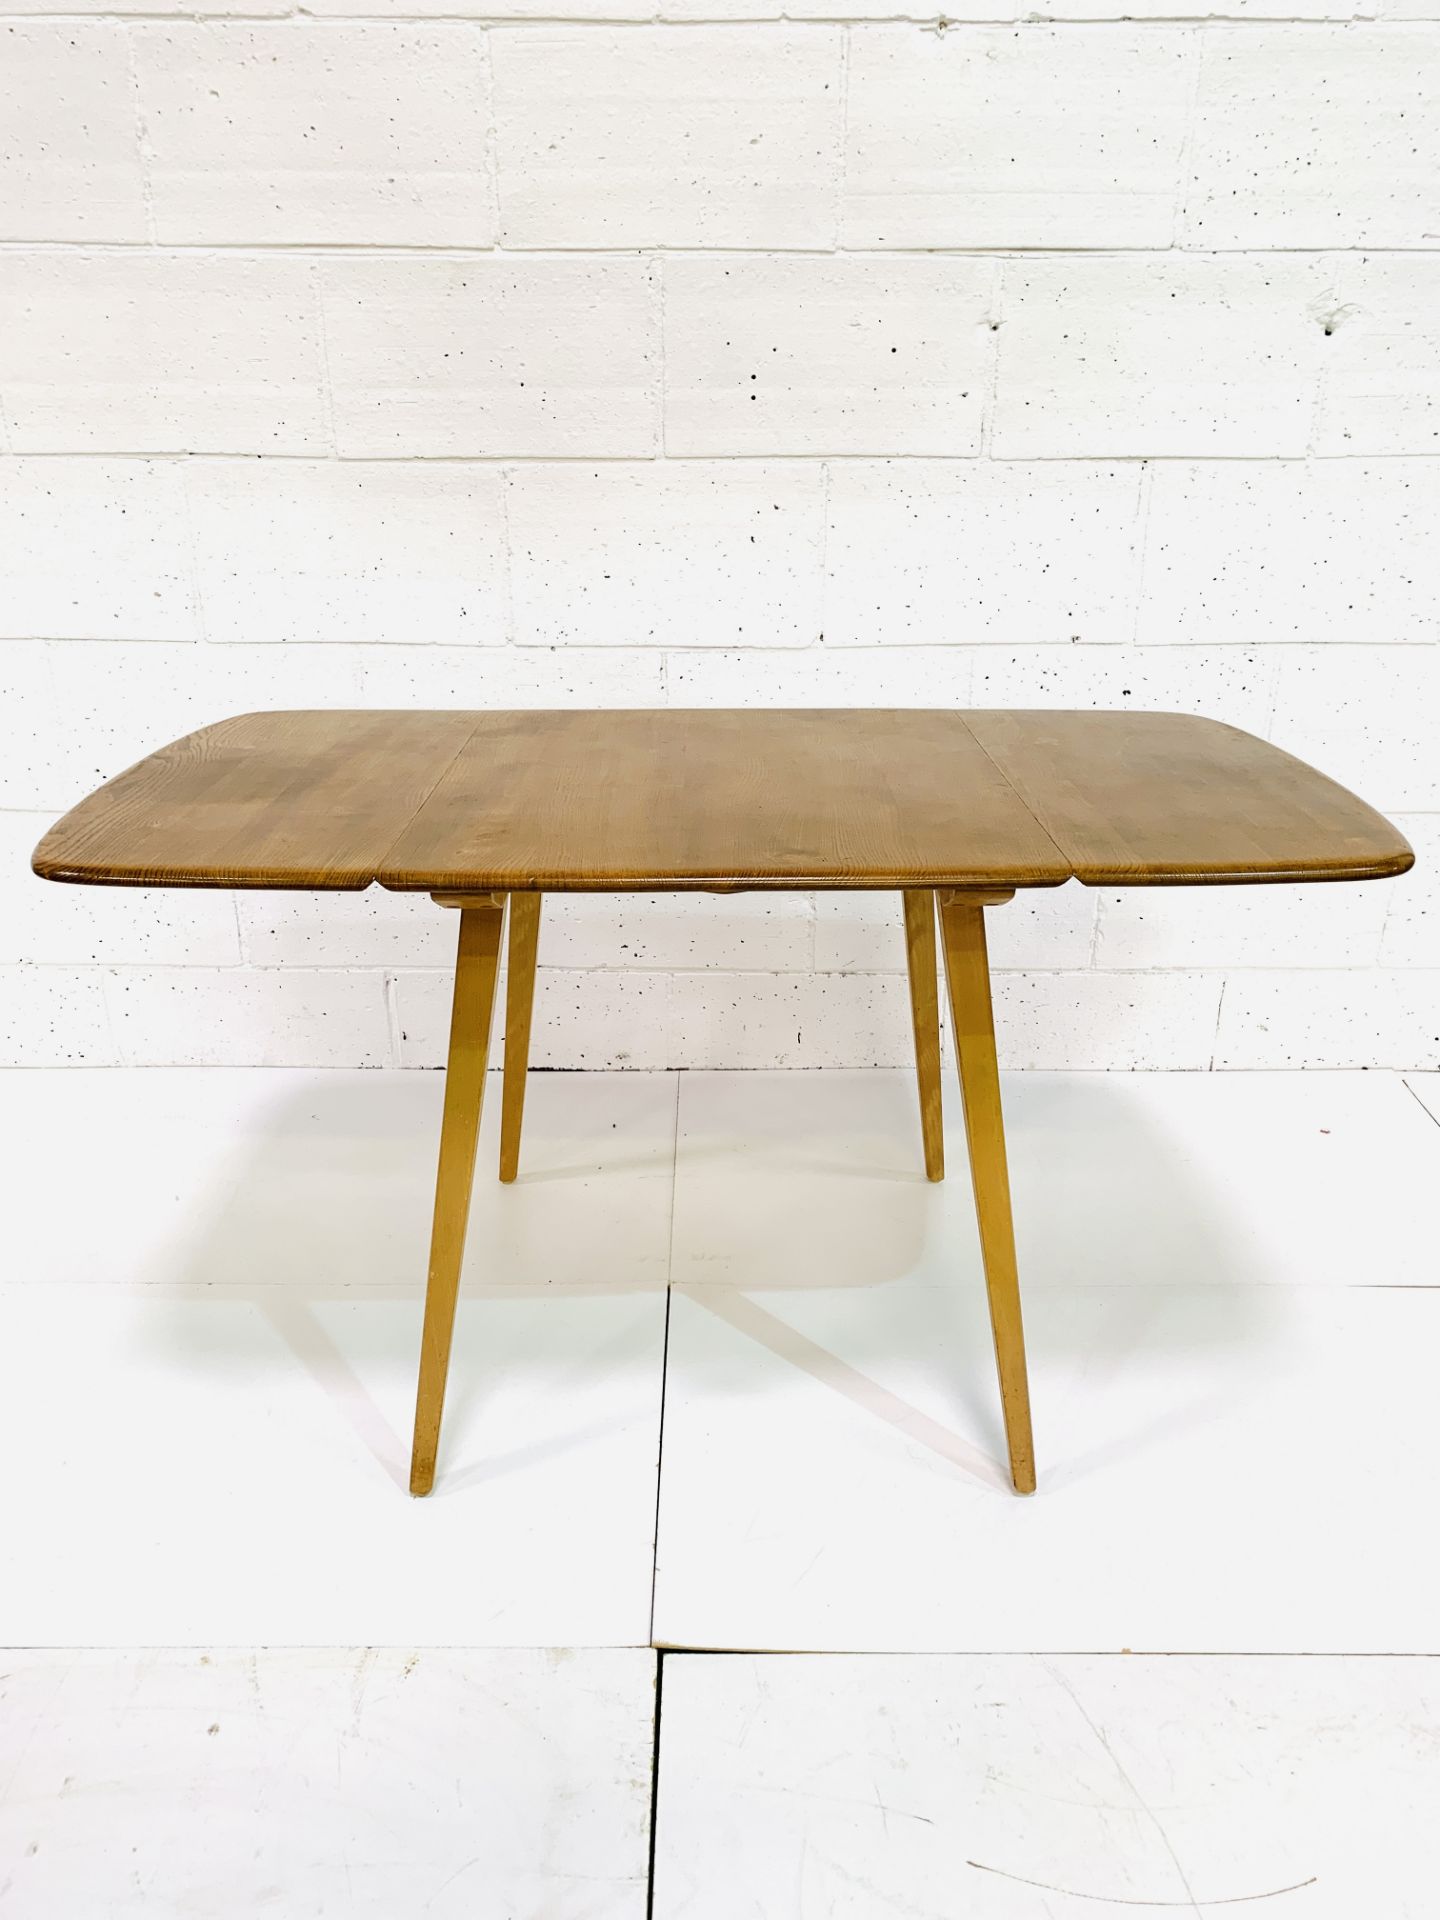 Ercol dropside table - Image 3 of 7